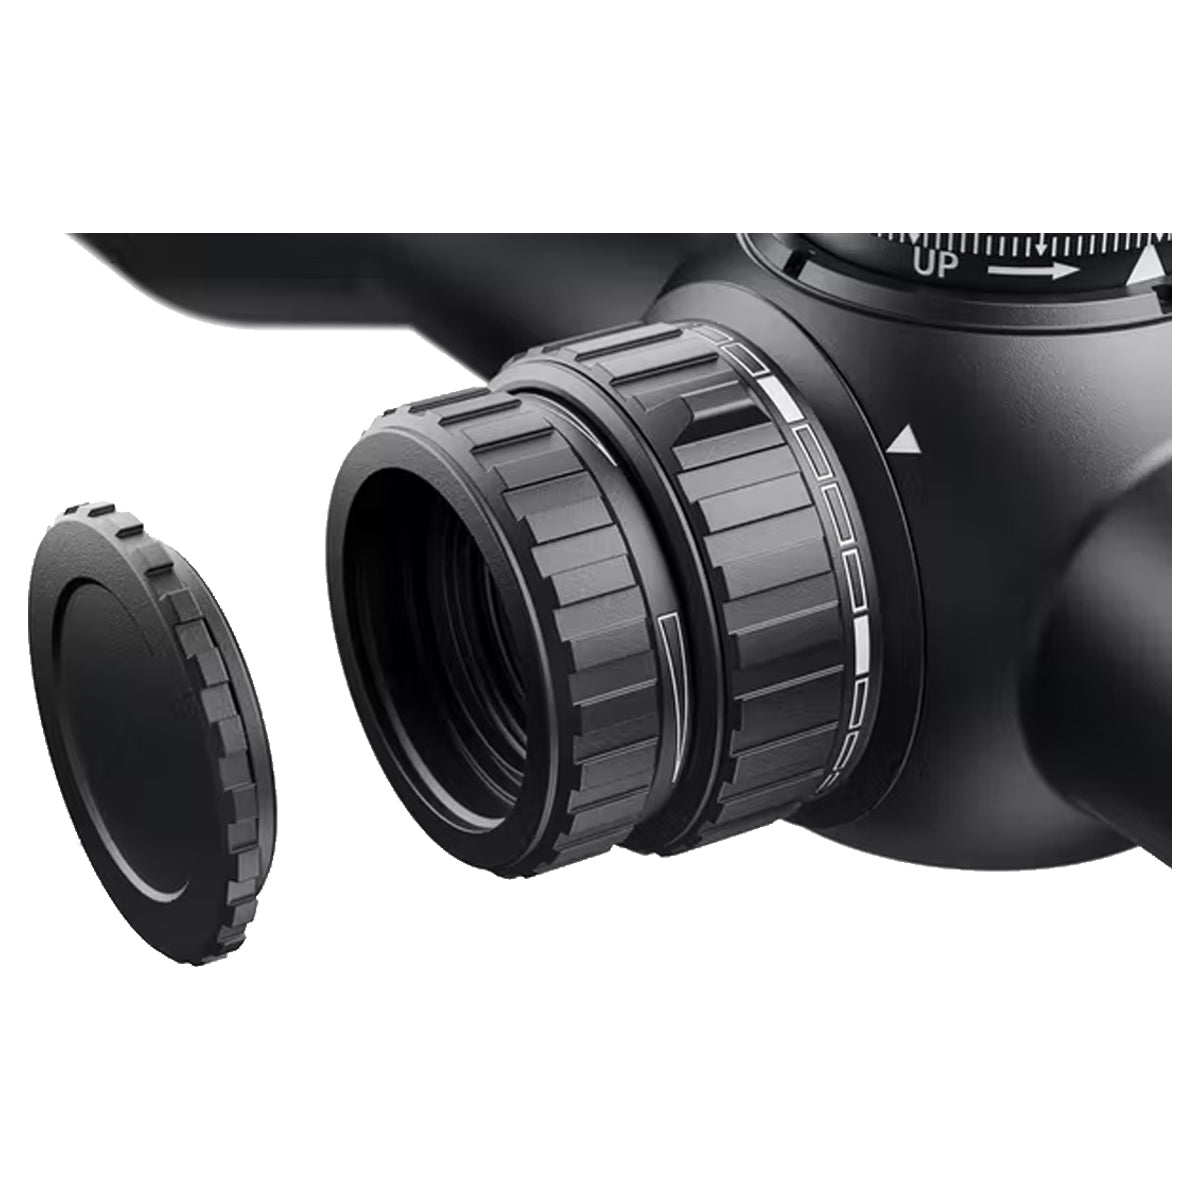 Zeiss LRP S5 5-25x56 ZF-MRI Reticle #16 in  by GOHUNT | Zeiss - GOHUNT Shop